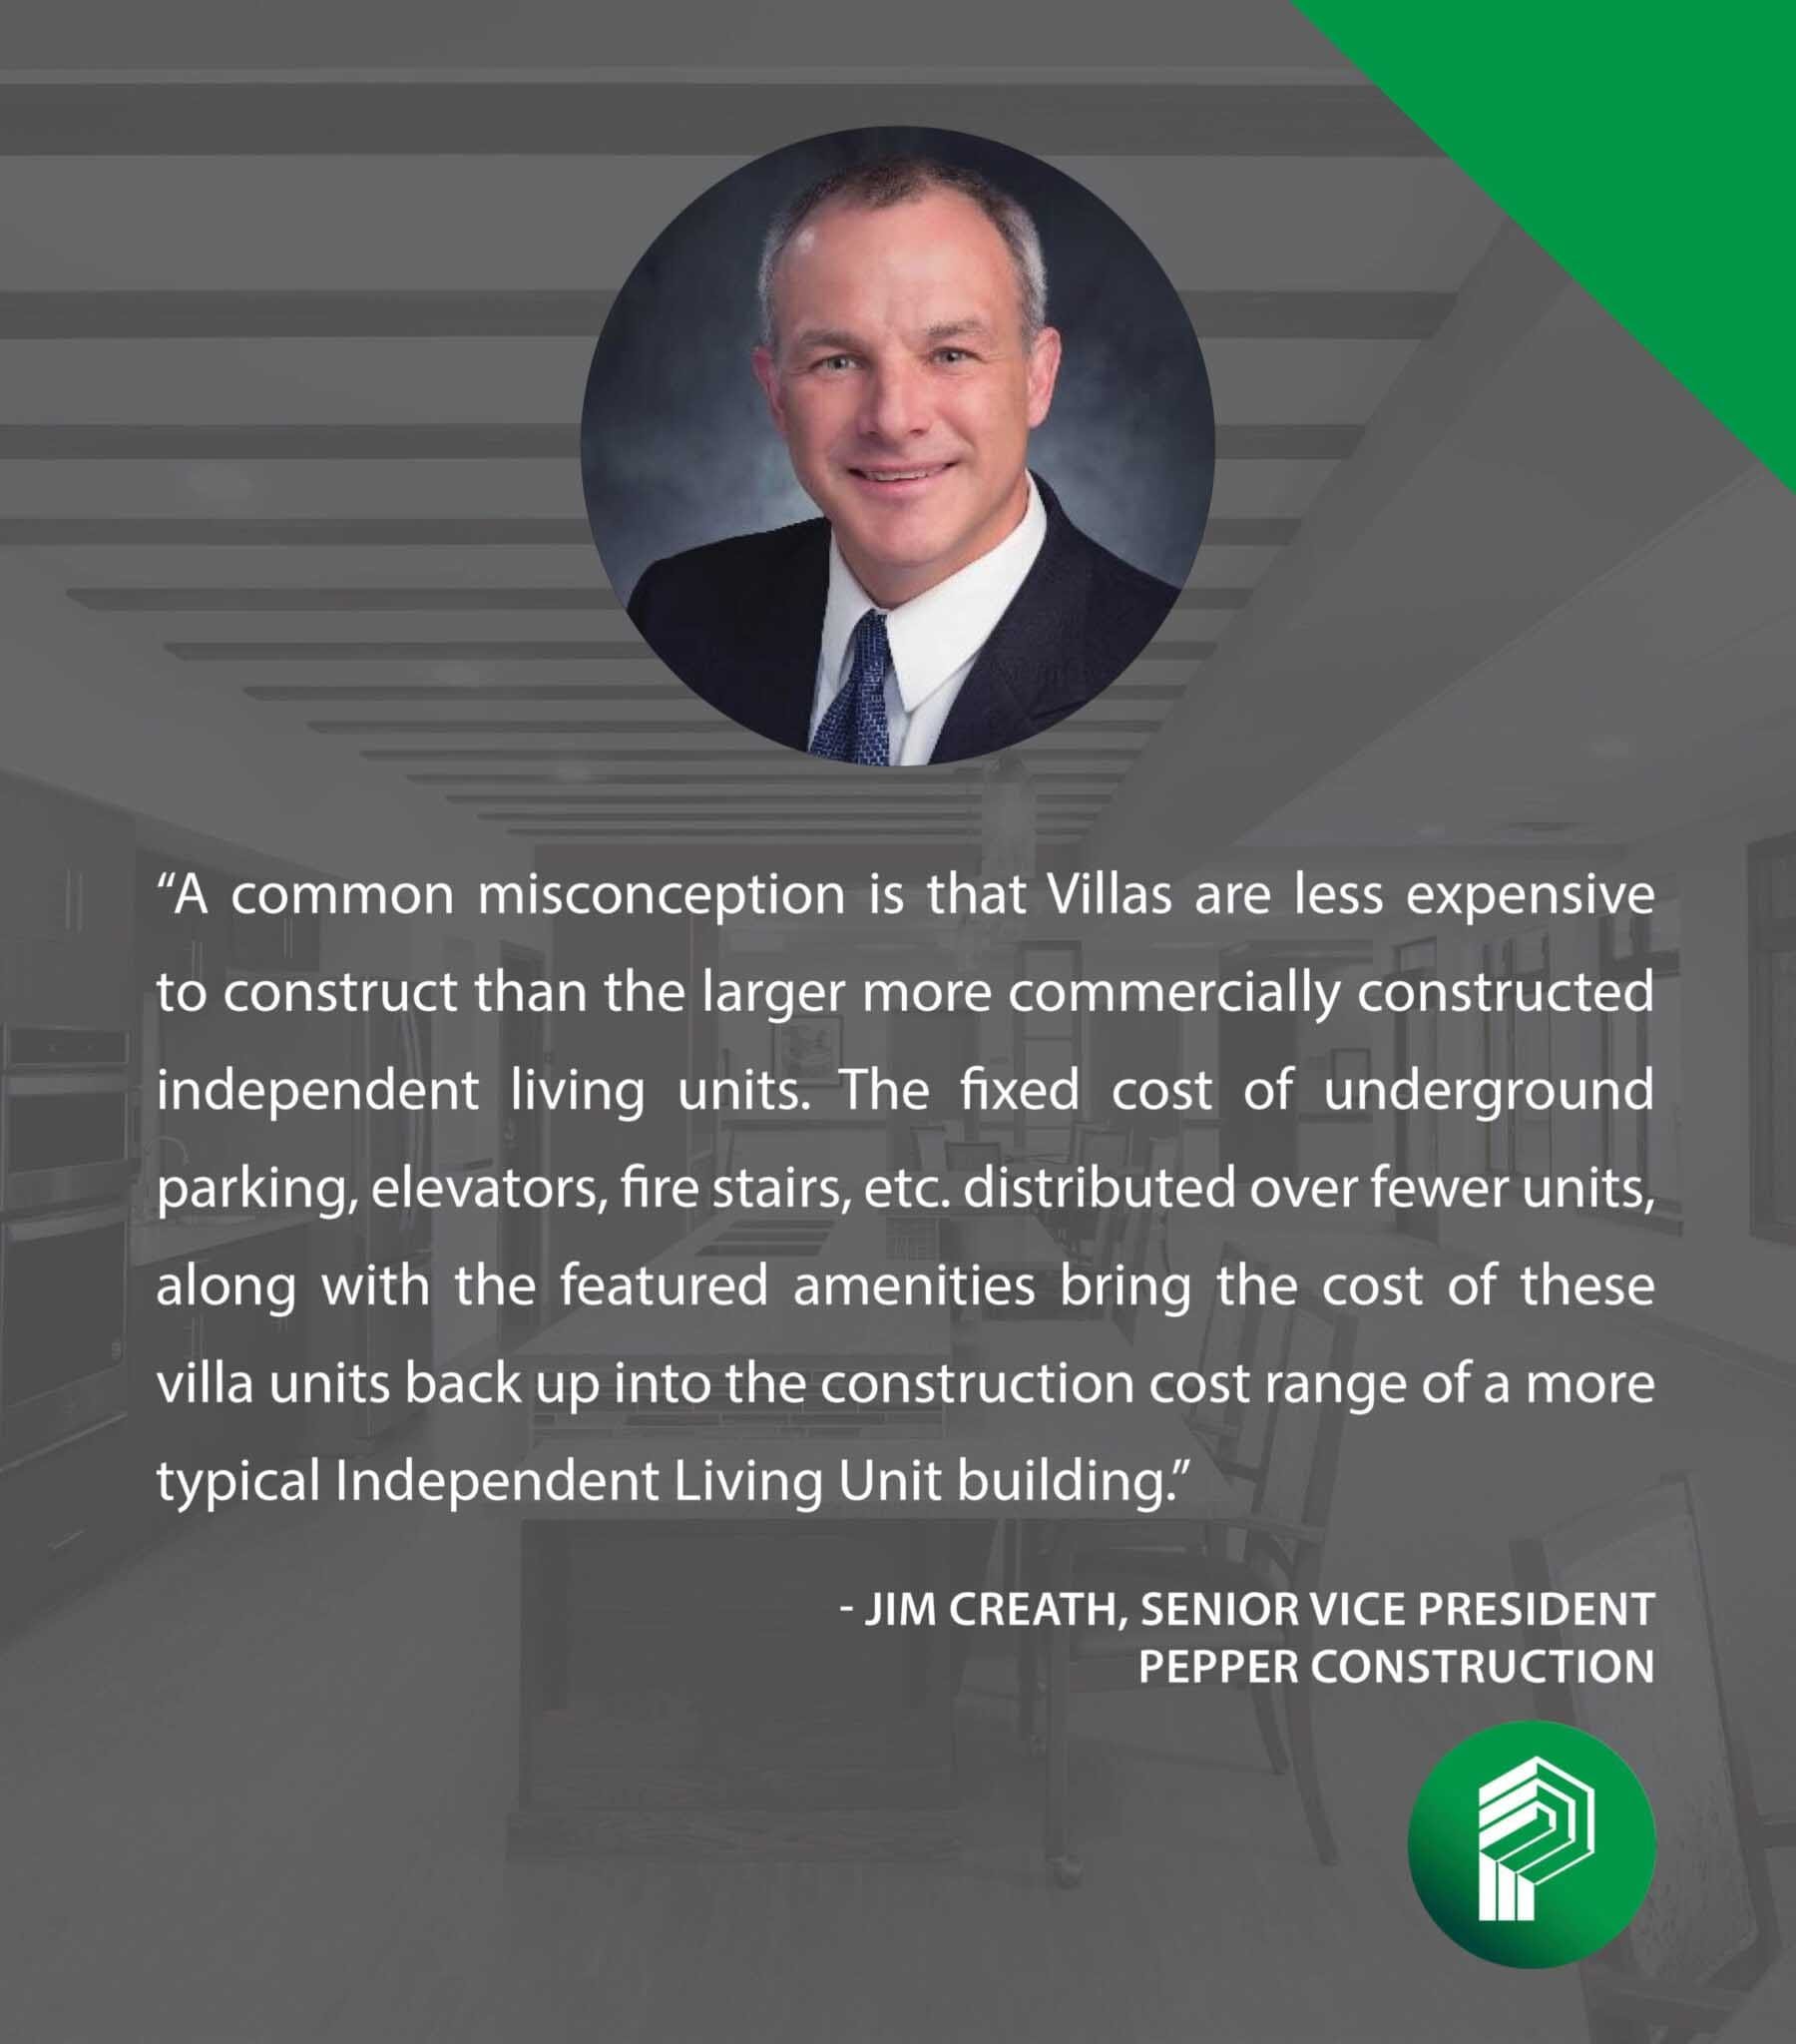 Jim Creath, VP of Pepper Construction is quoted on construction costs in senior living construction